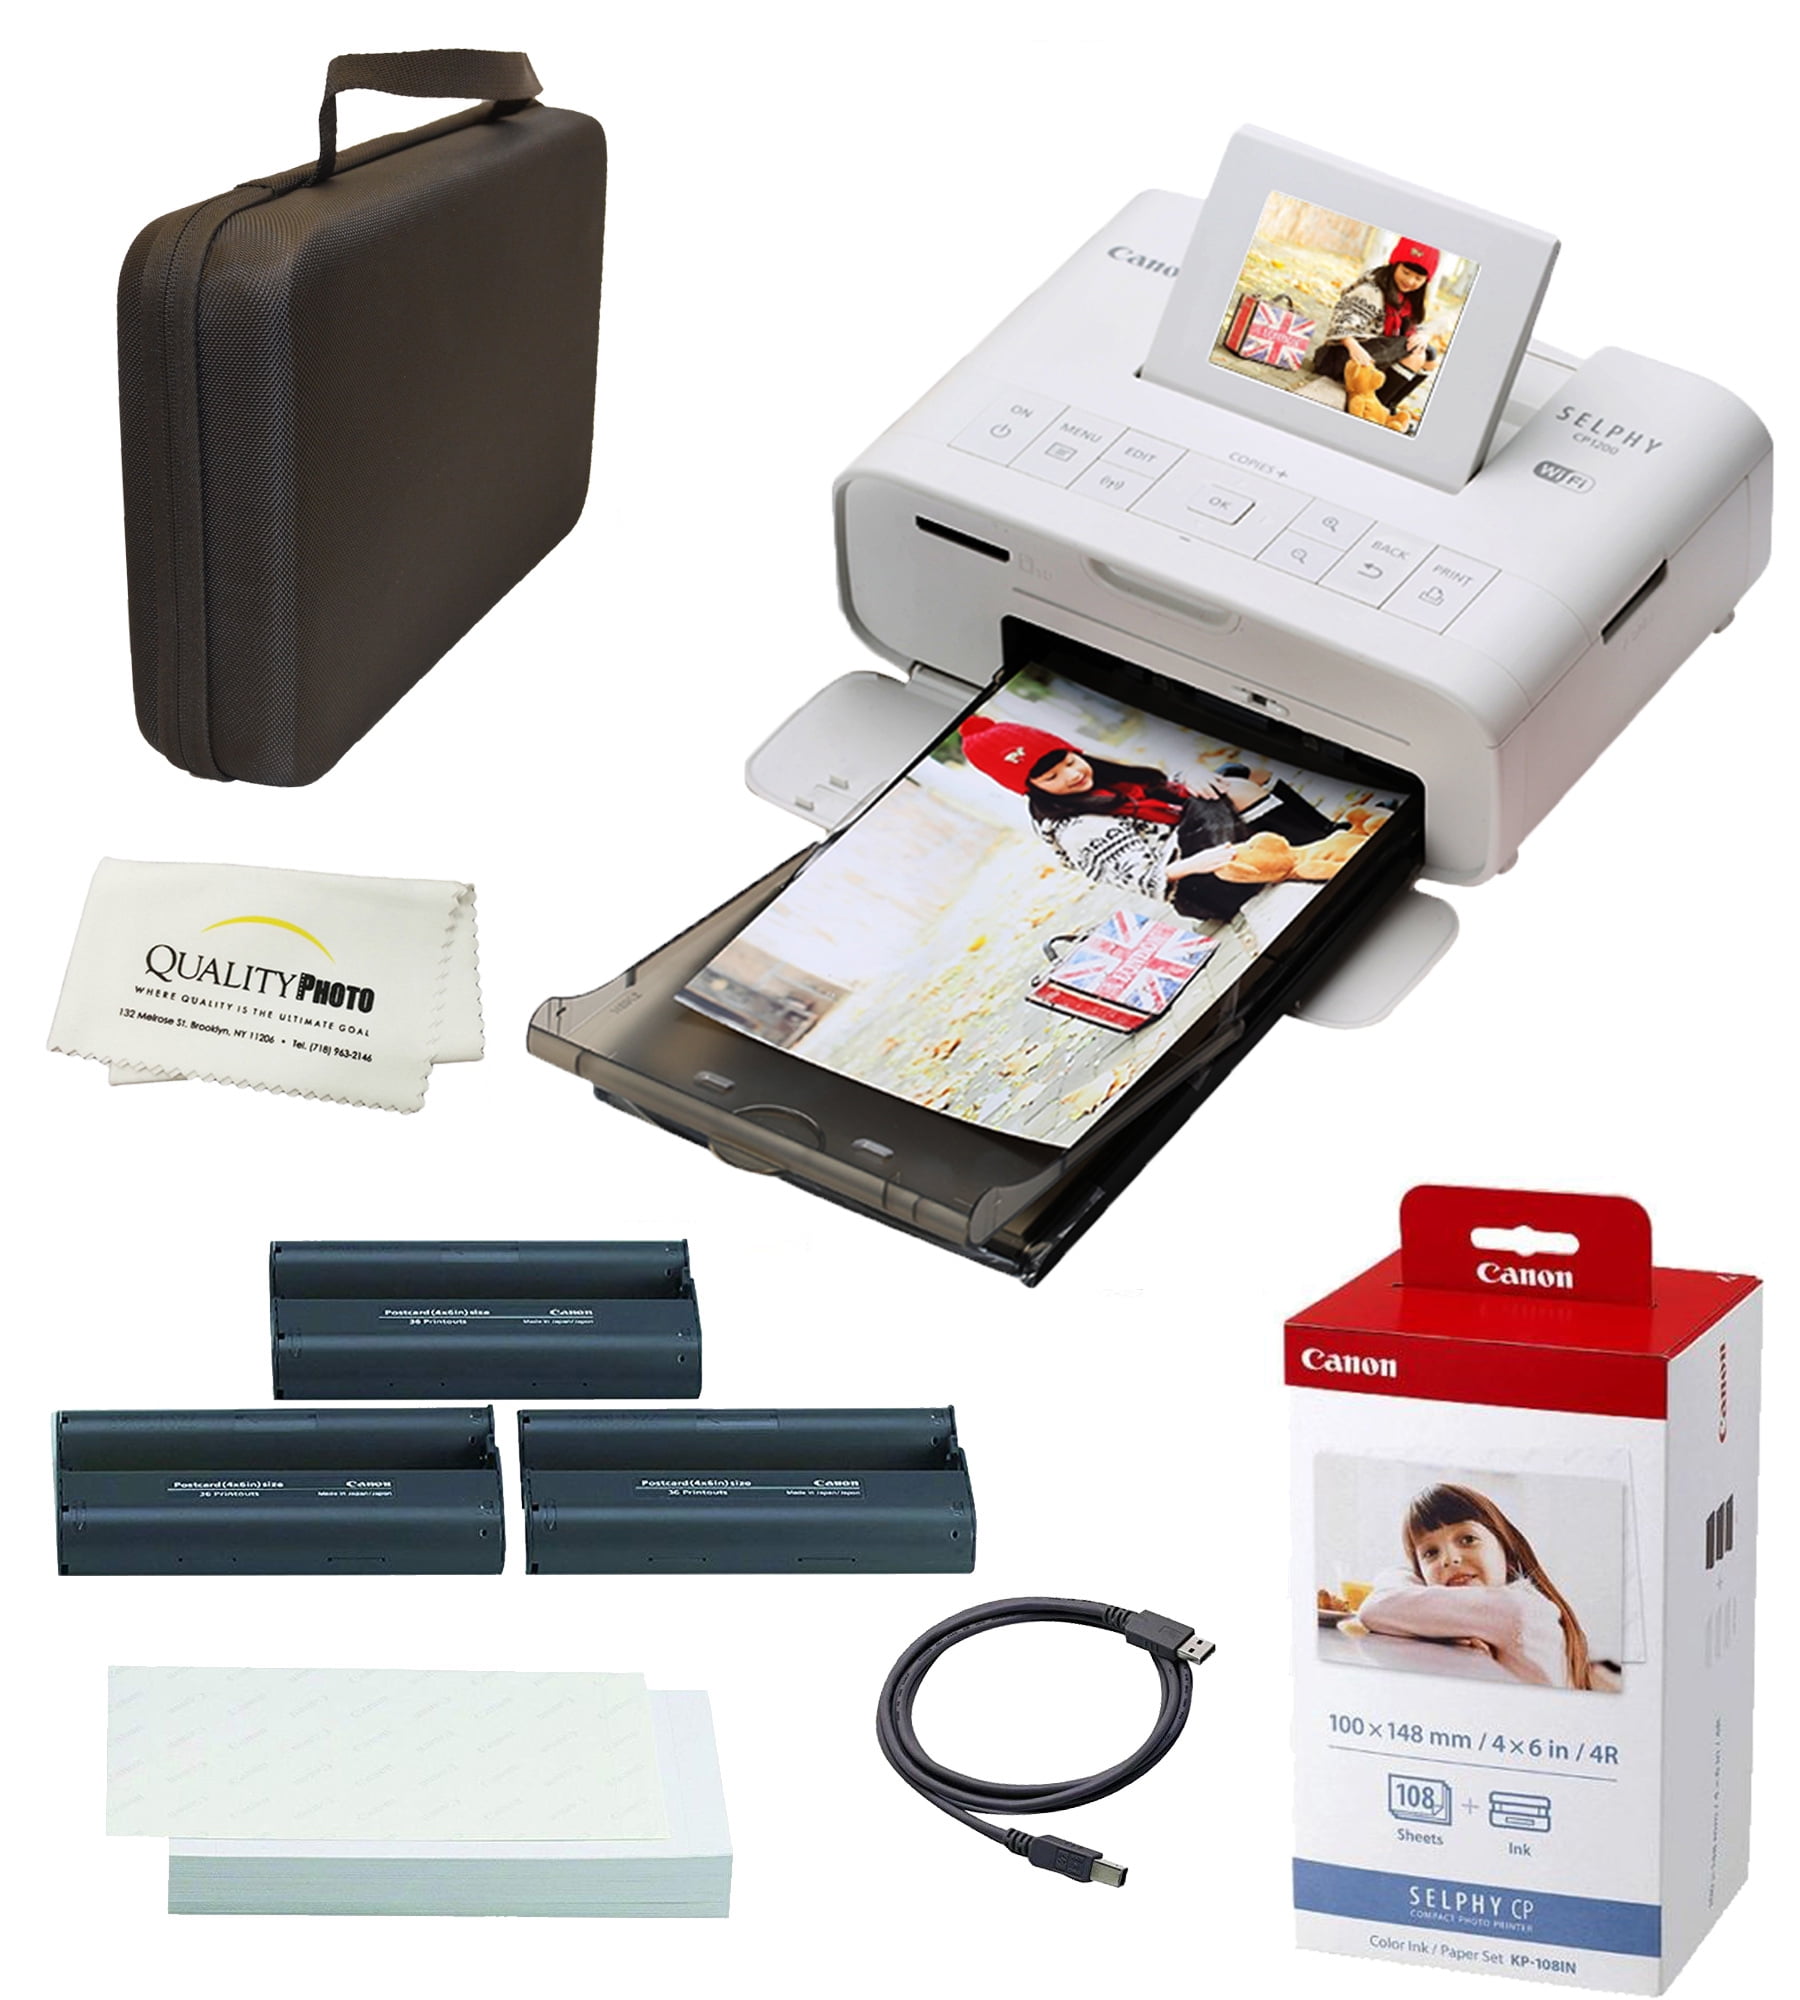 Canon Selphy CP1500 Wireless Compact Photo Printer (Black) with 2-Pack  KP-108IN Color Ink Paper Set (216 Sheets of 4x6 Paper + 6 Ink Cartridges)